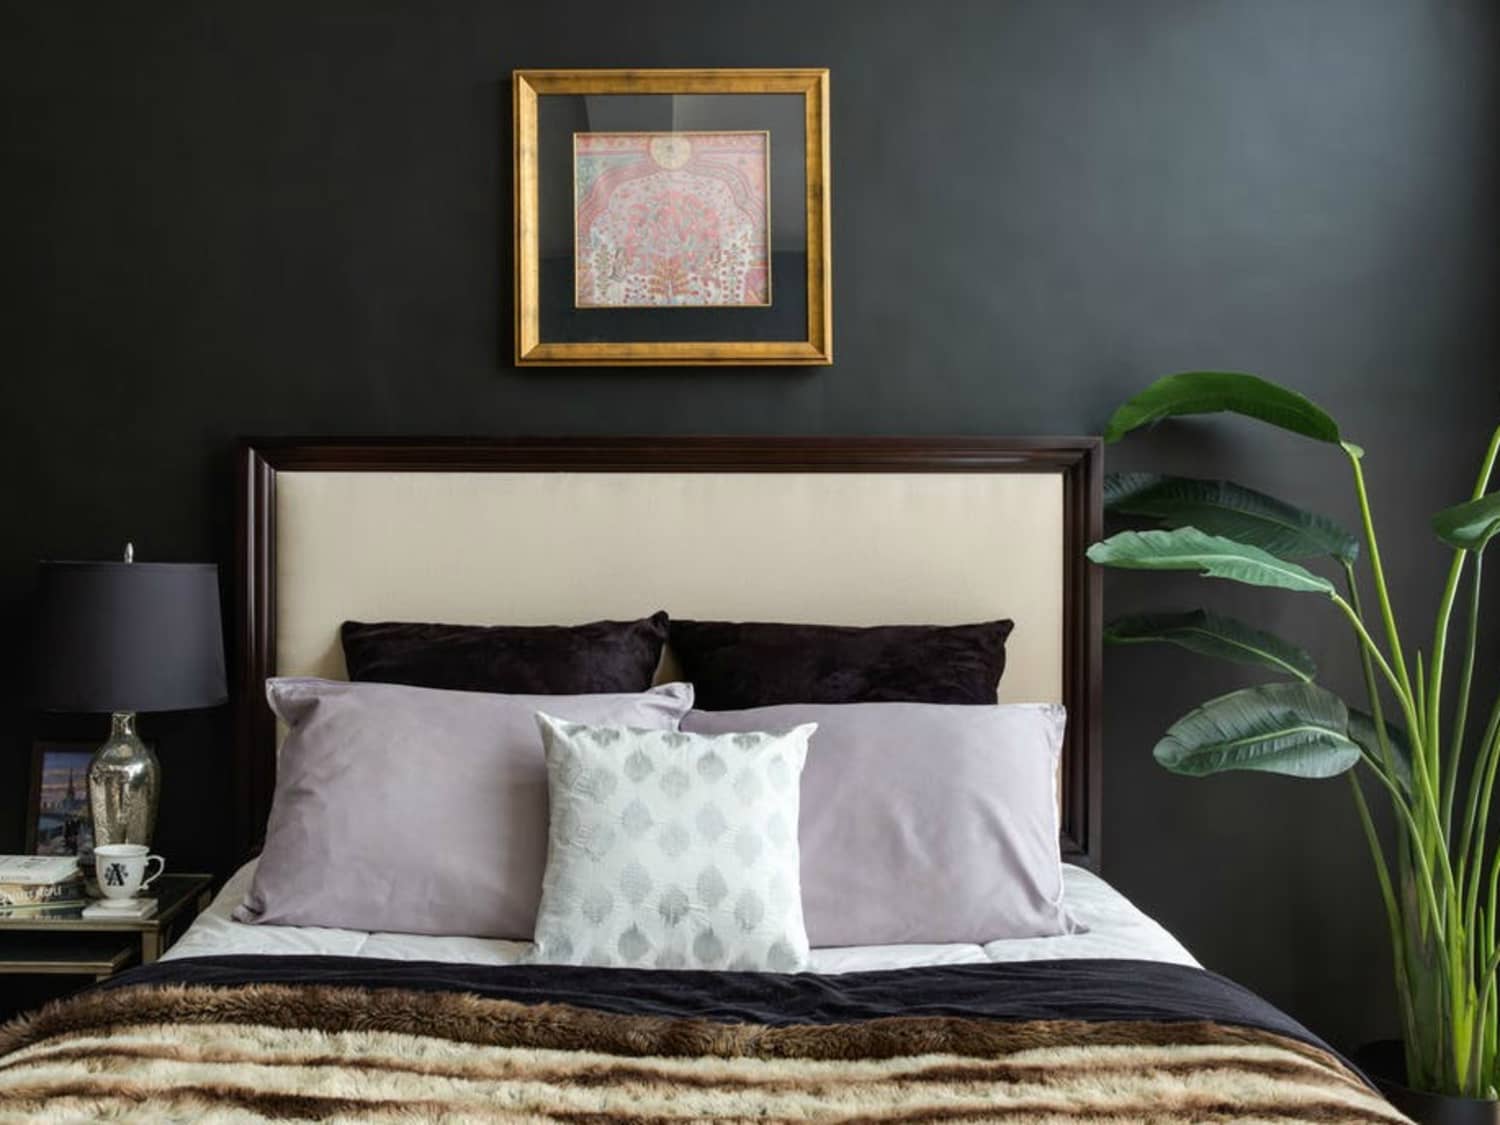 Bed pillow arrangements: style your bed according to size